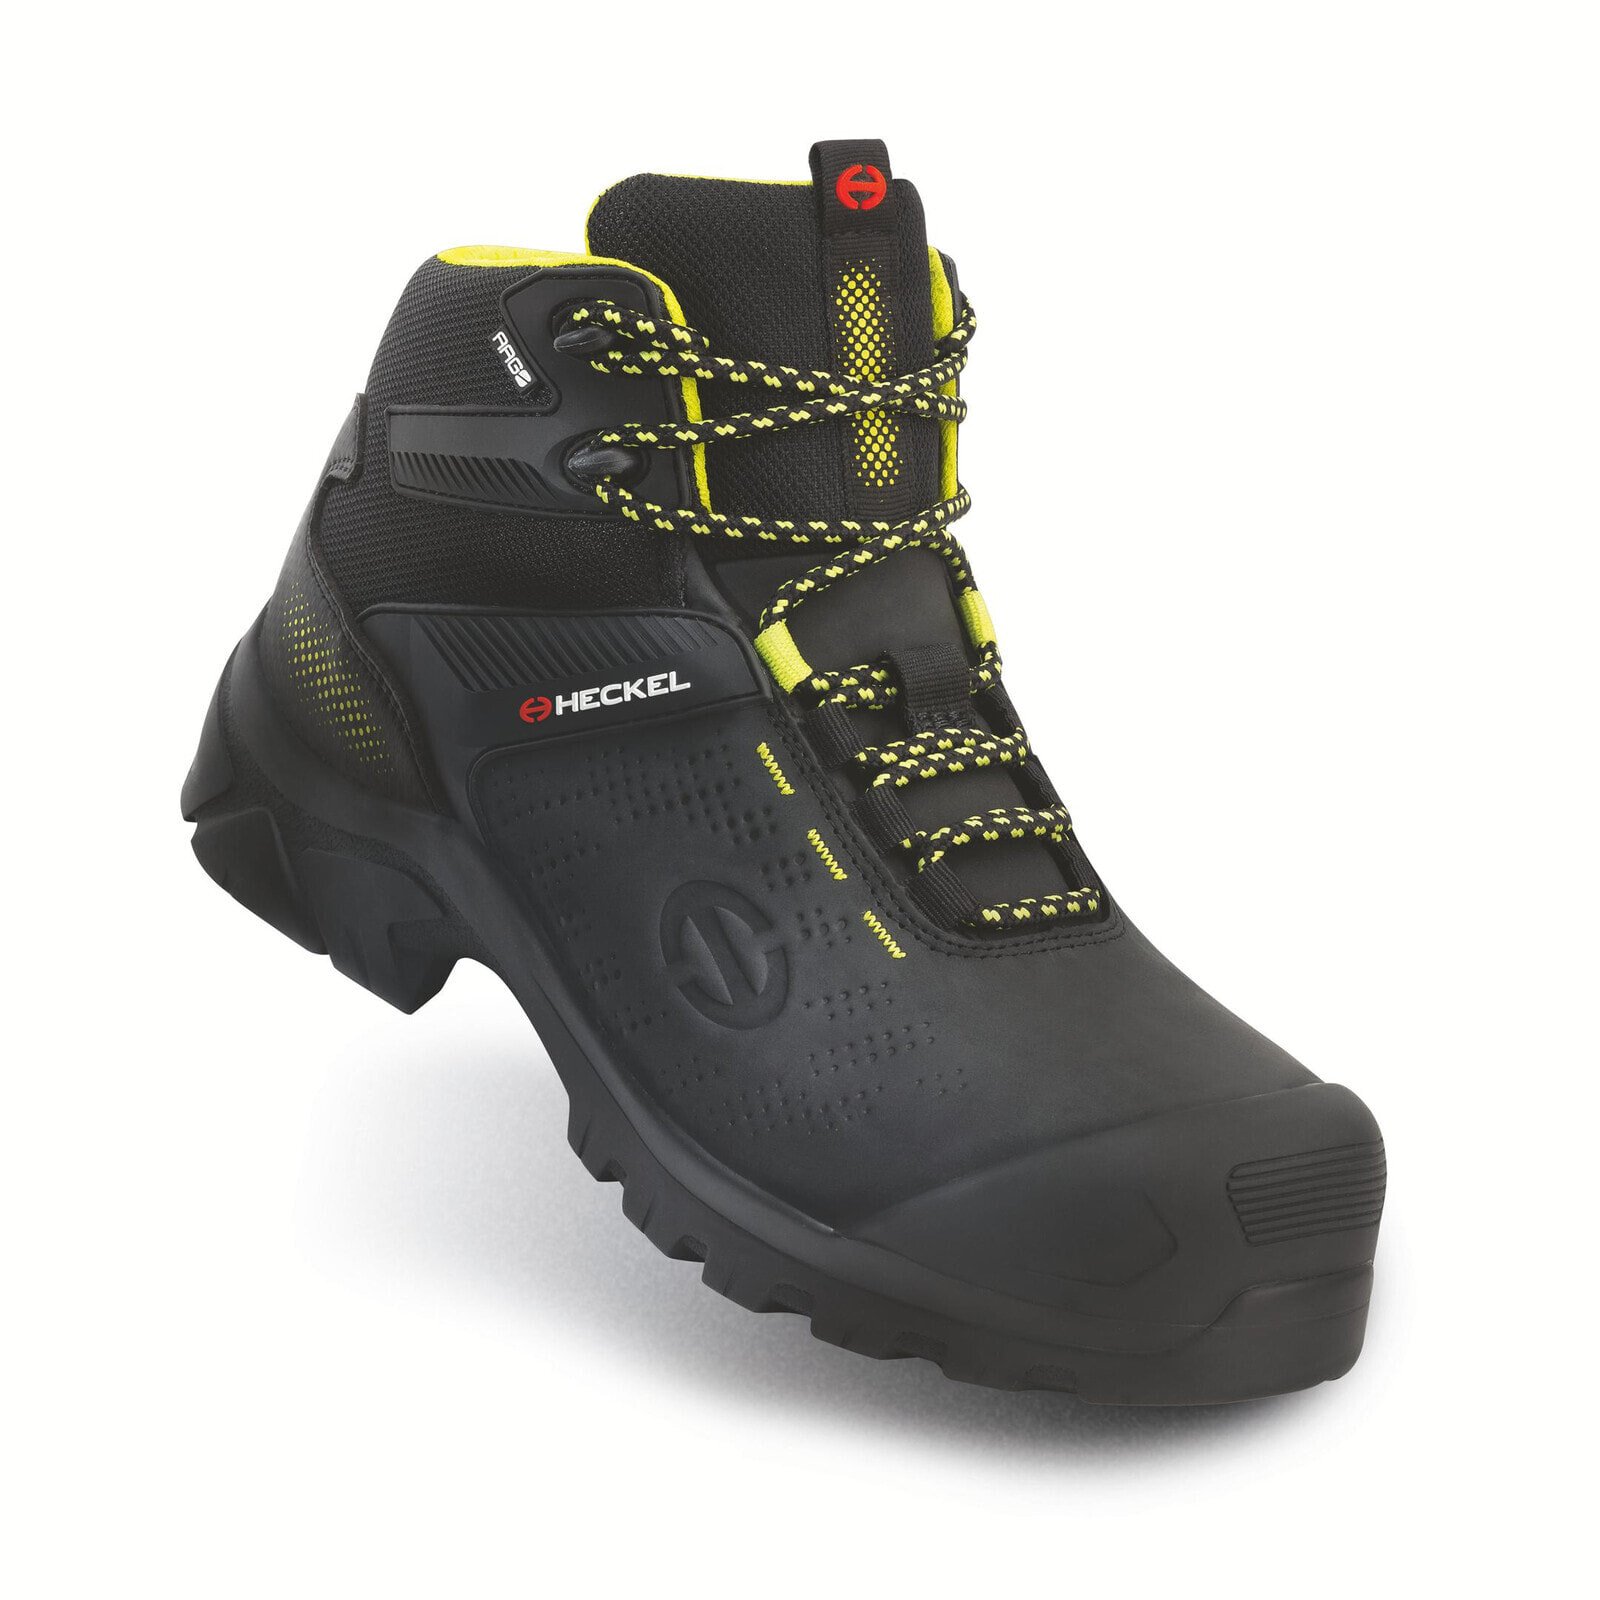 Uvex  Maccrossroad 3.0 - Male - Adult - Safety boots - Black - Yellow - EUE - CI - HI - HRO - S3 - SRC